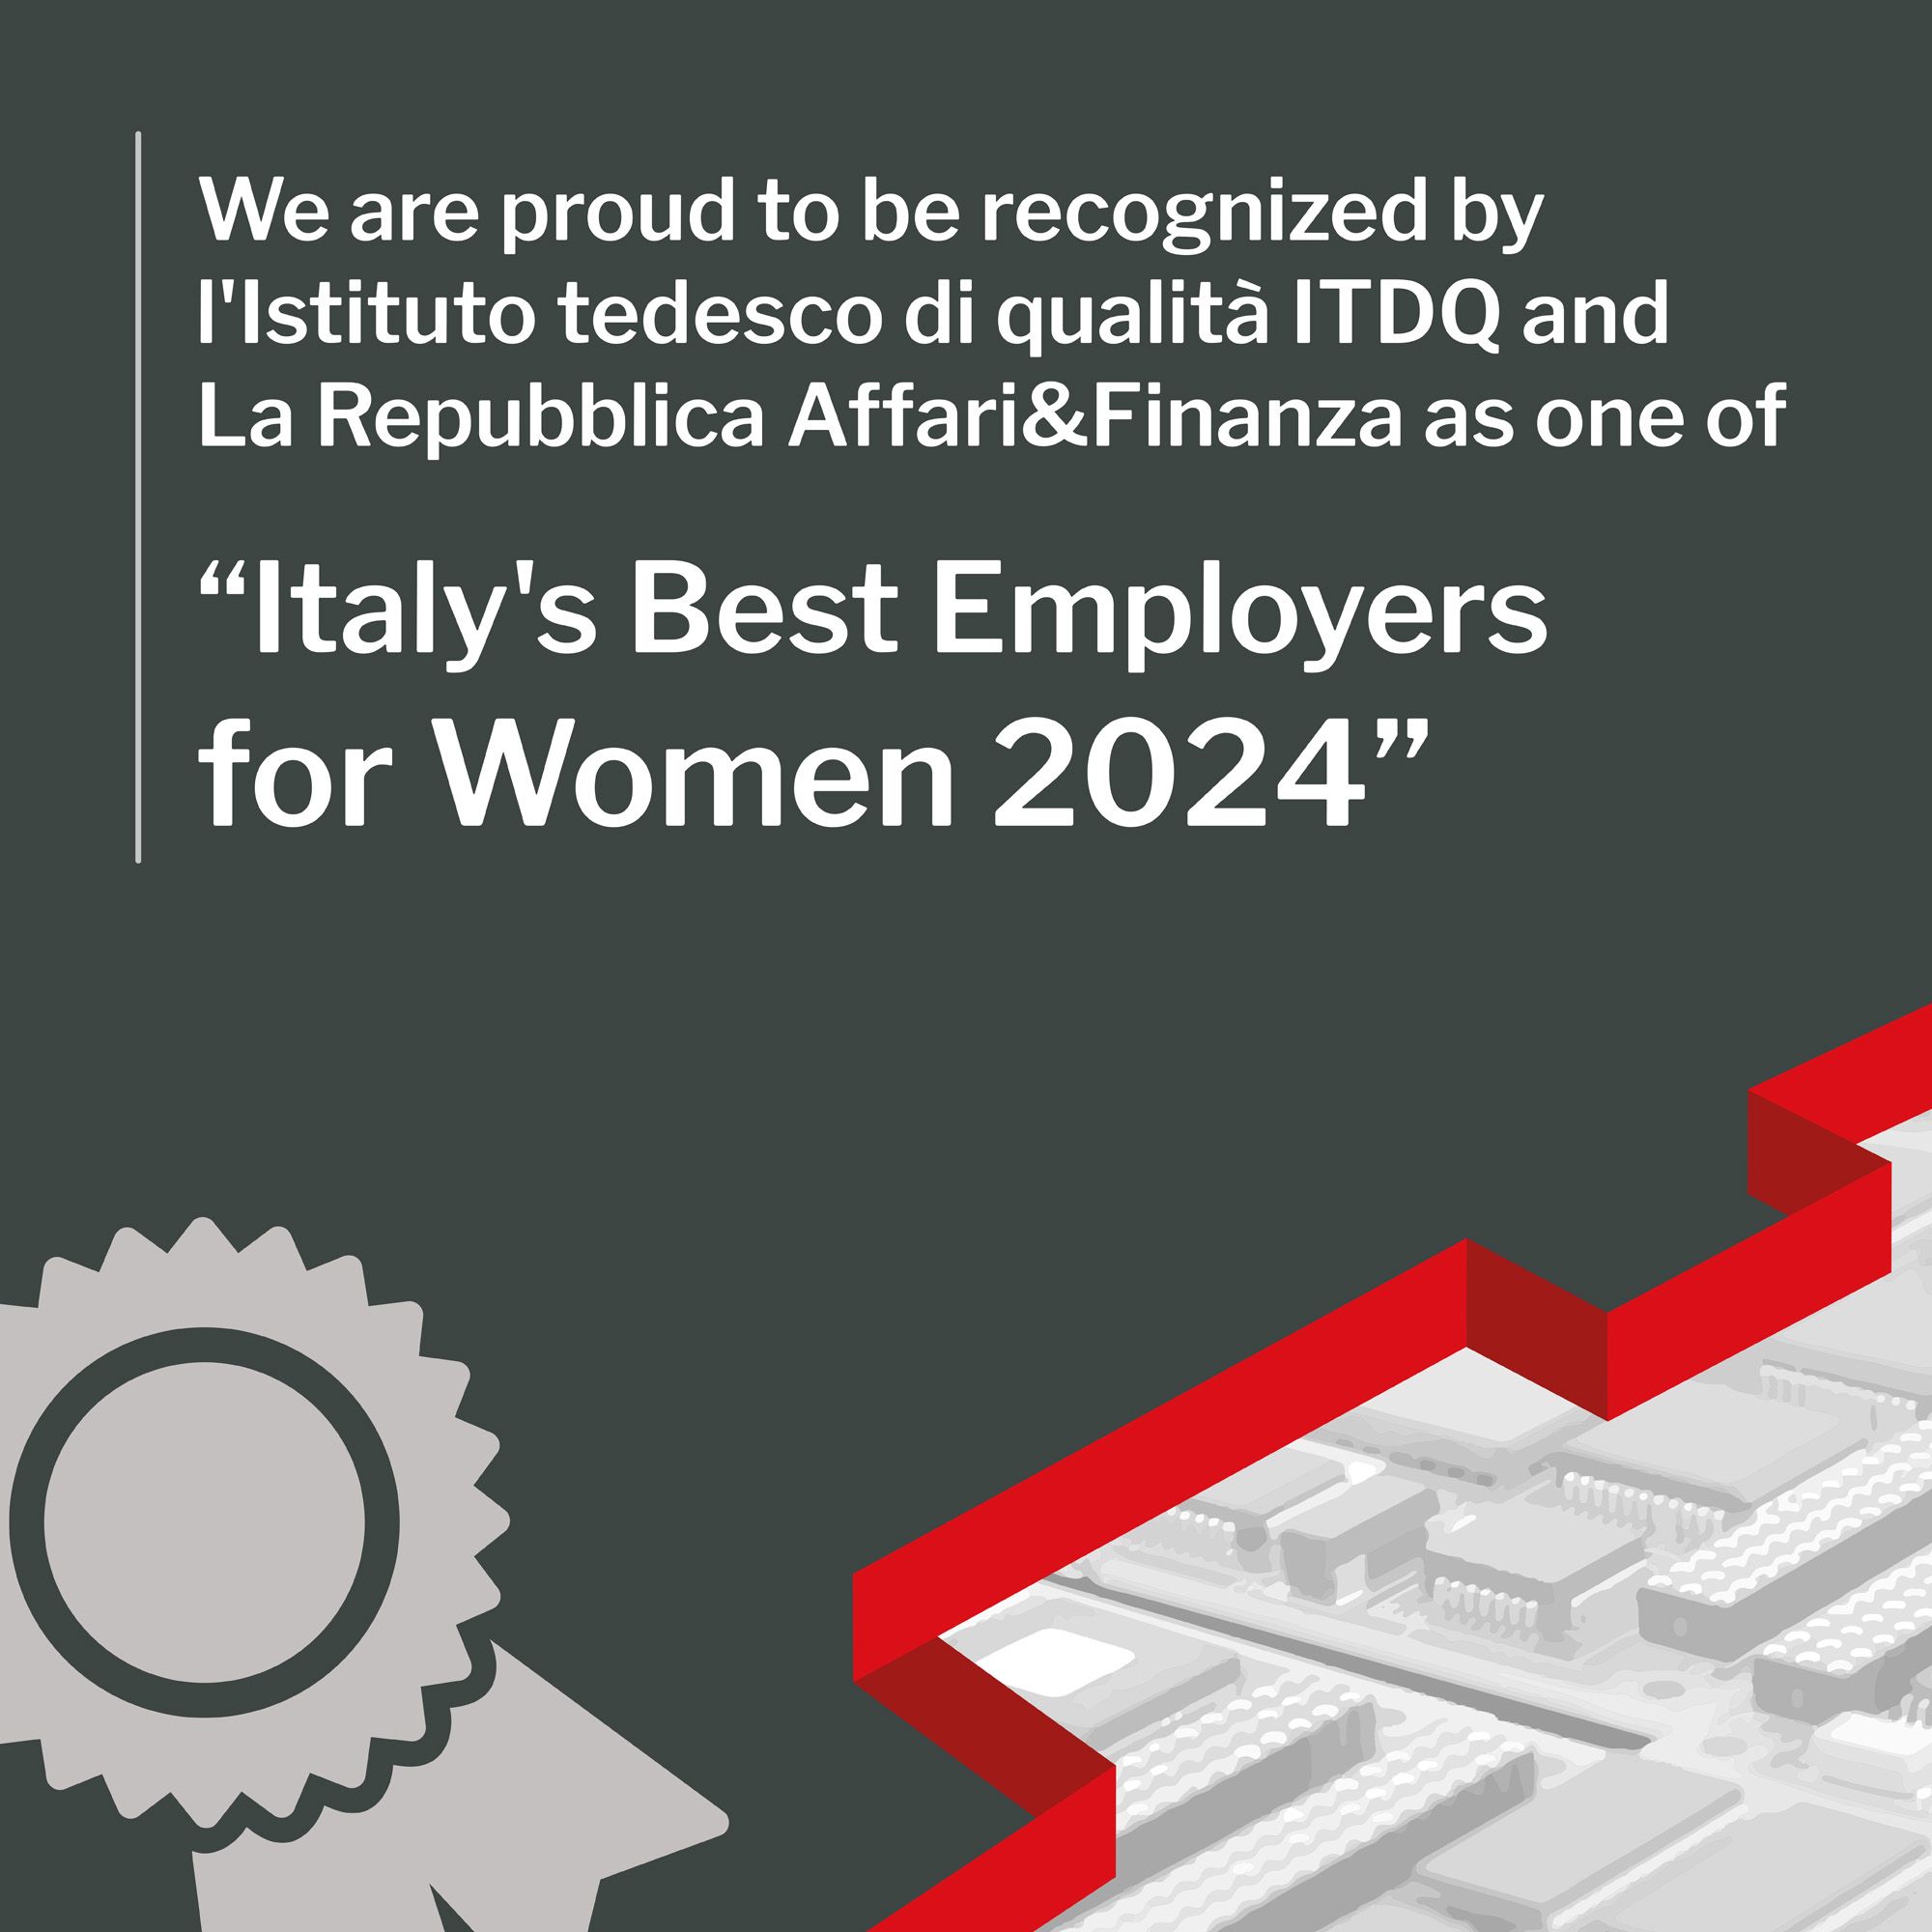 Elemaster among the Best Employers for Women 2024